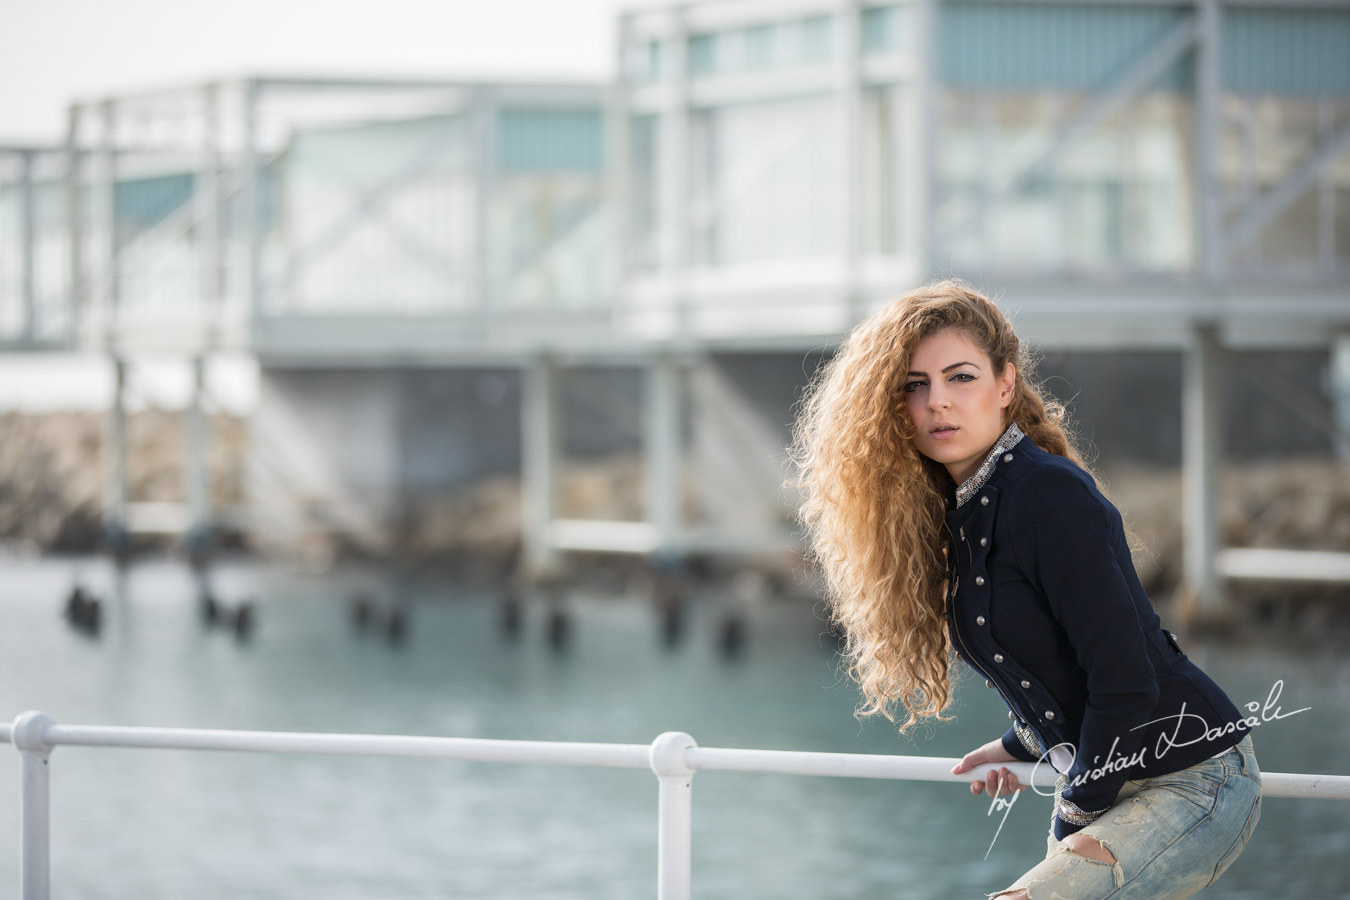 Themis posing next to the new buildings of the Old Port Limassol. Photo by Cristian Dascalu